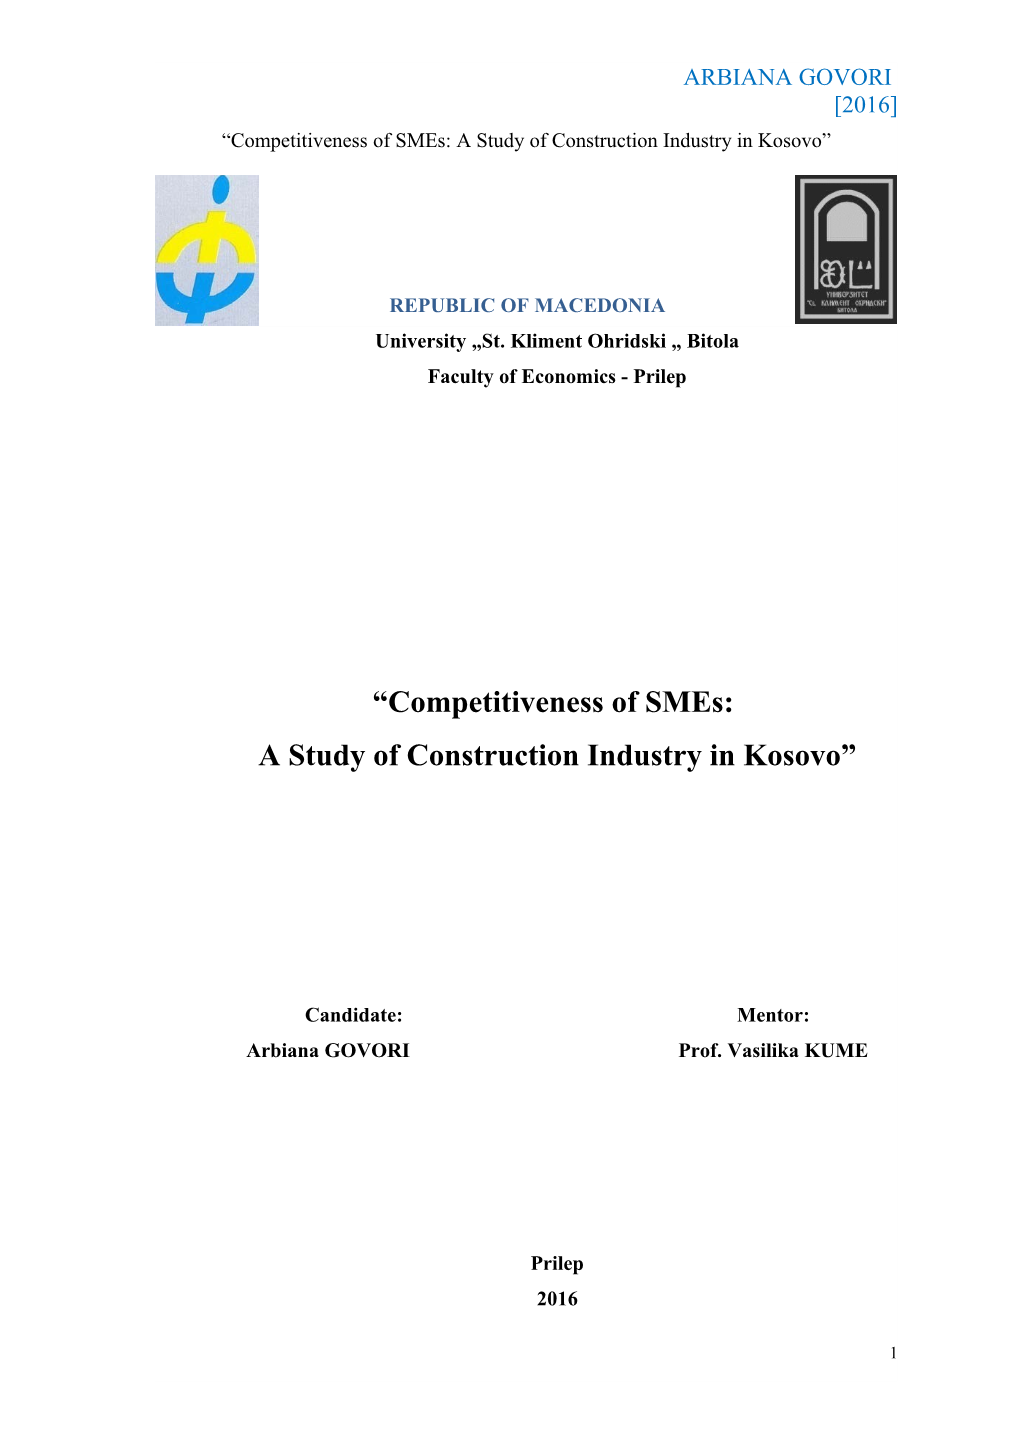 Competitiveness of Smes: a Study of Construction Industry in Kosovo